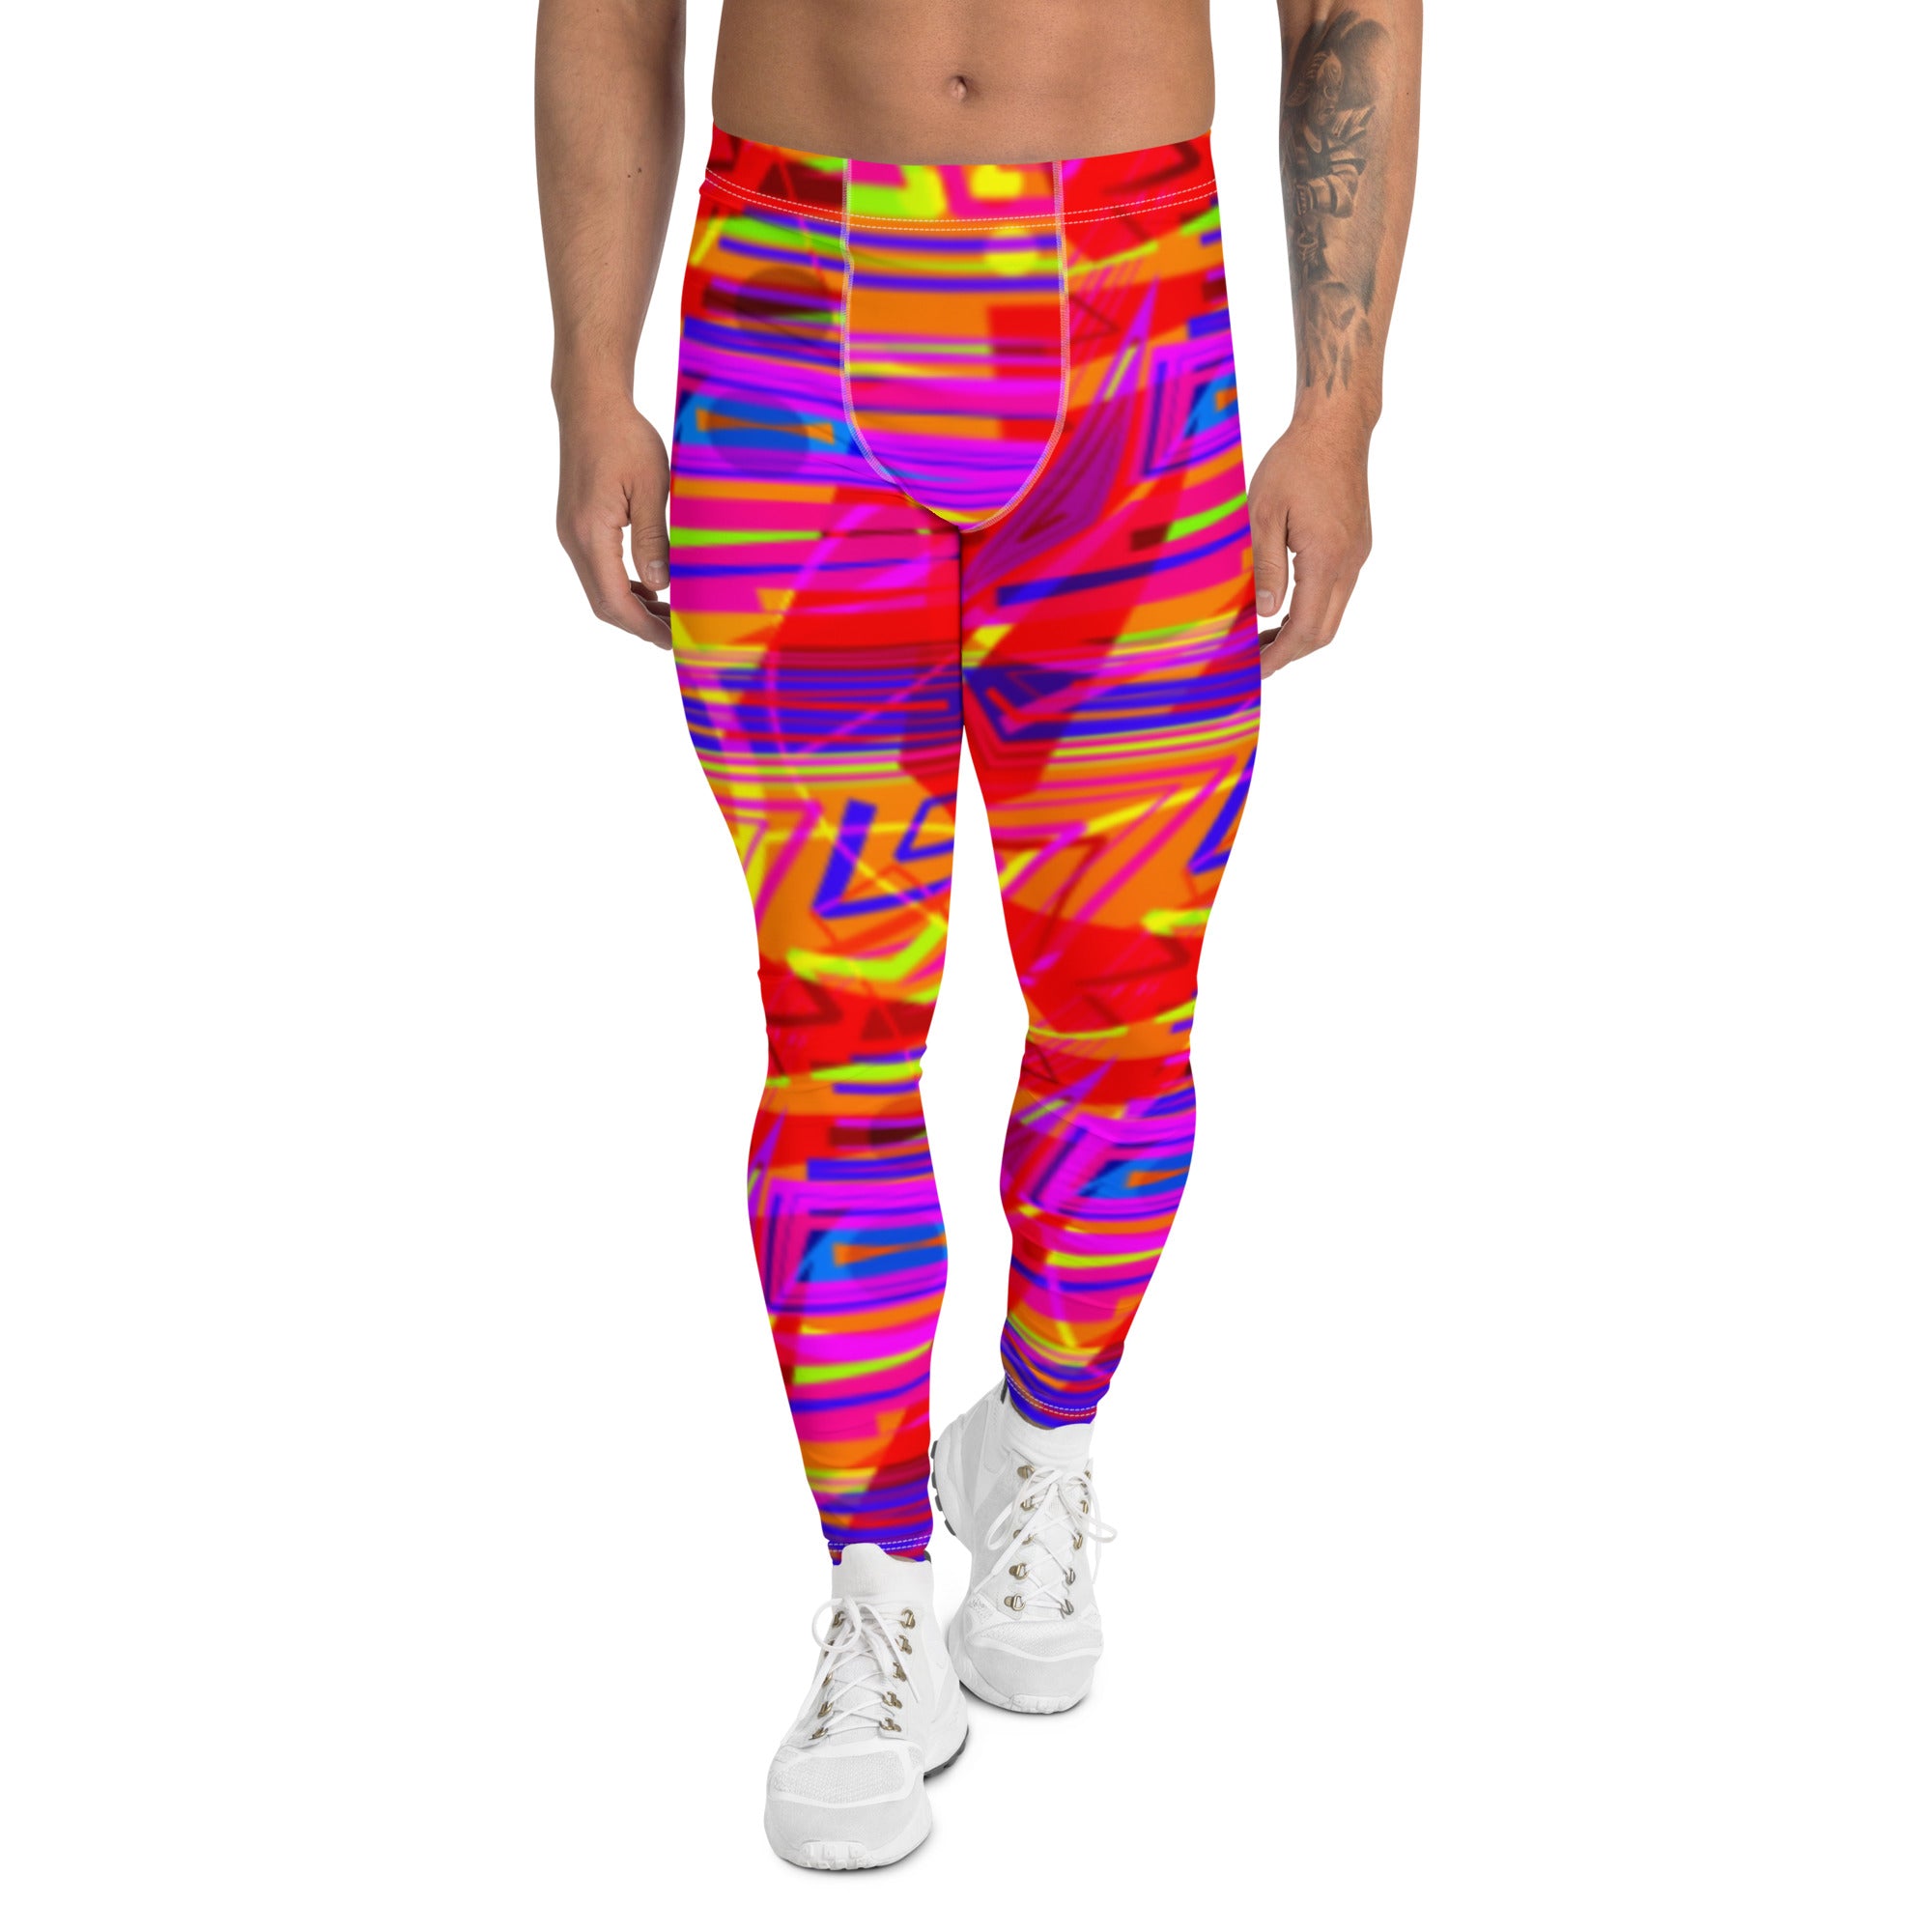 Crazy Men's Leggings Patterned Tropical Harajuku Men's Gym Meggs Festival  Meggings Party Outfit Rave Gear Mens Running Tights - Etsy